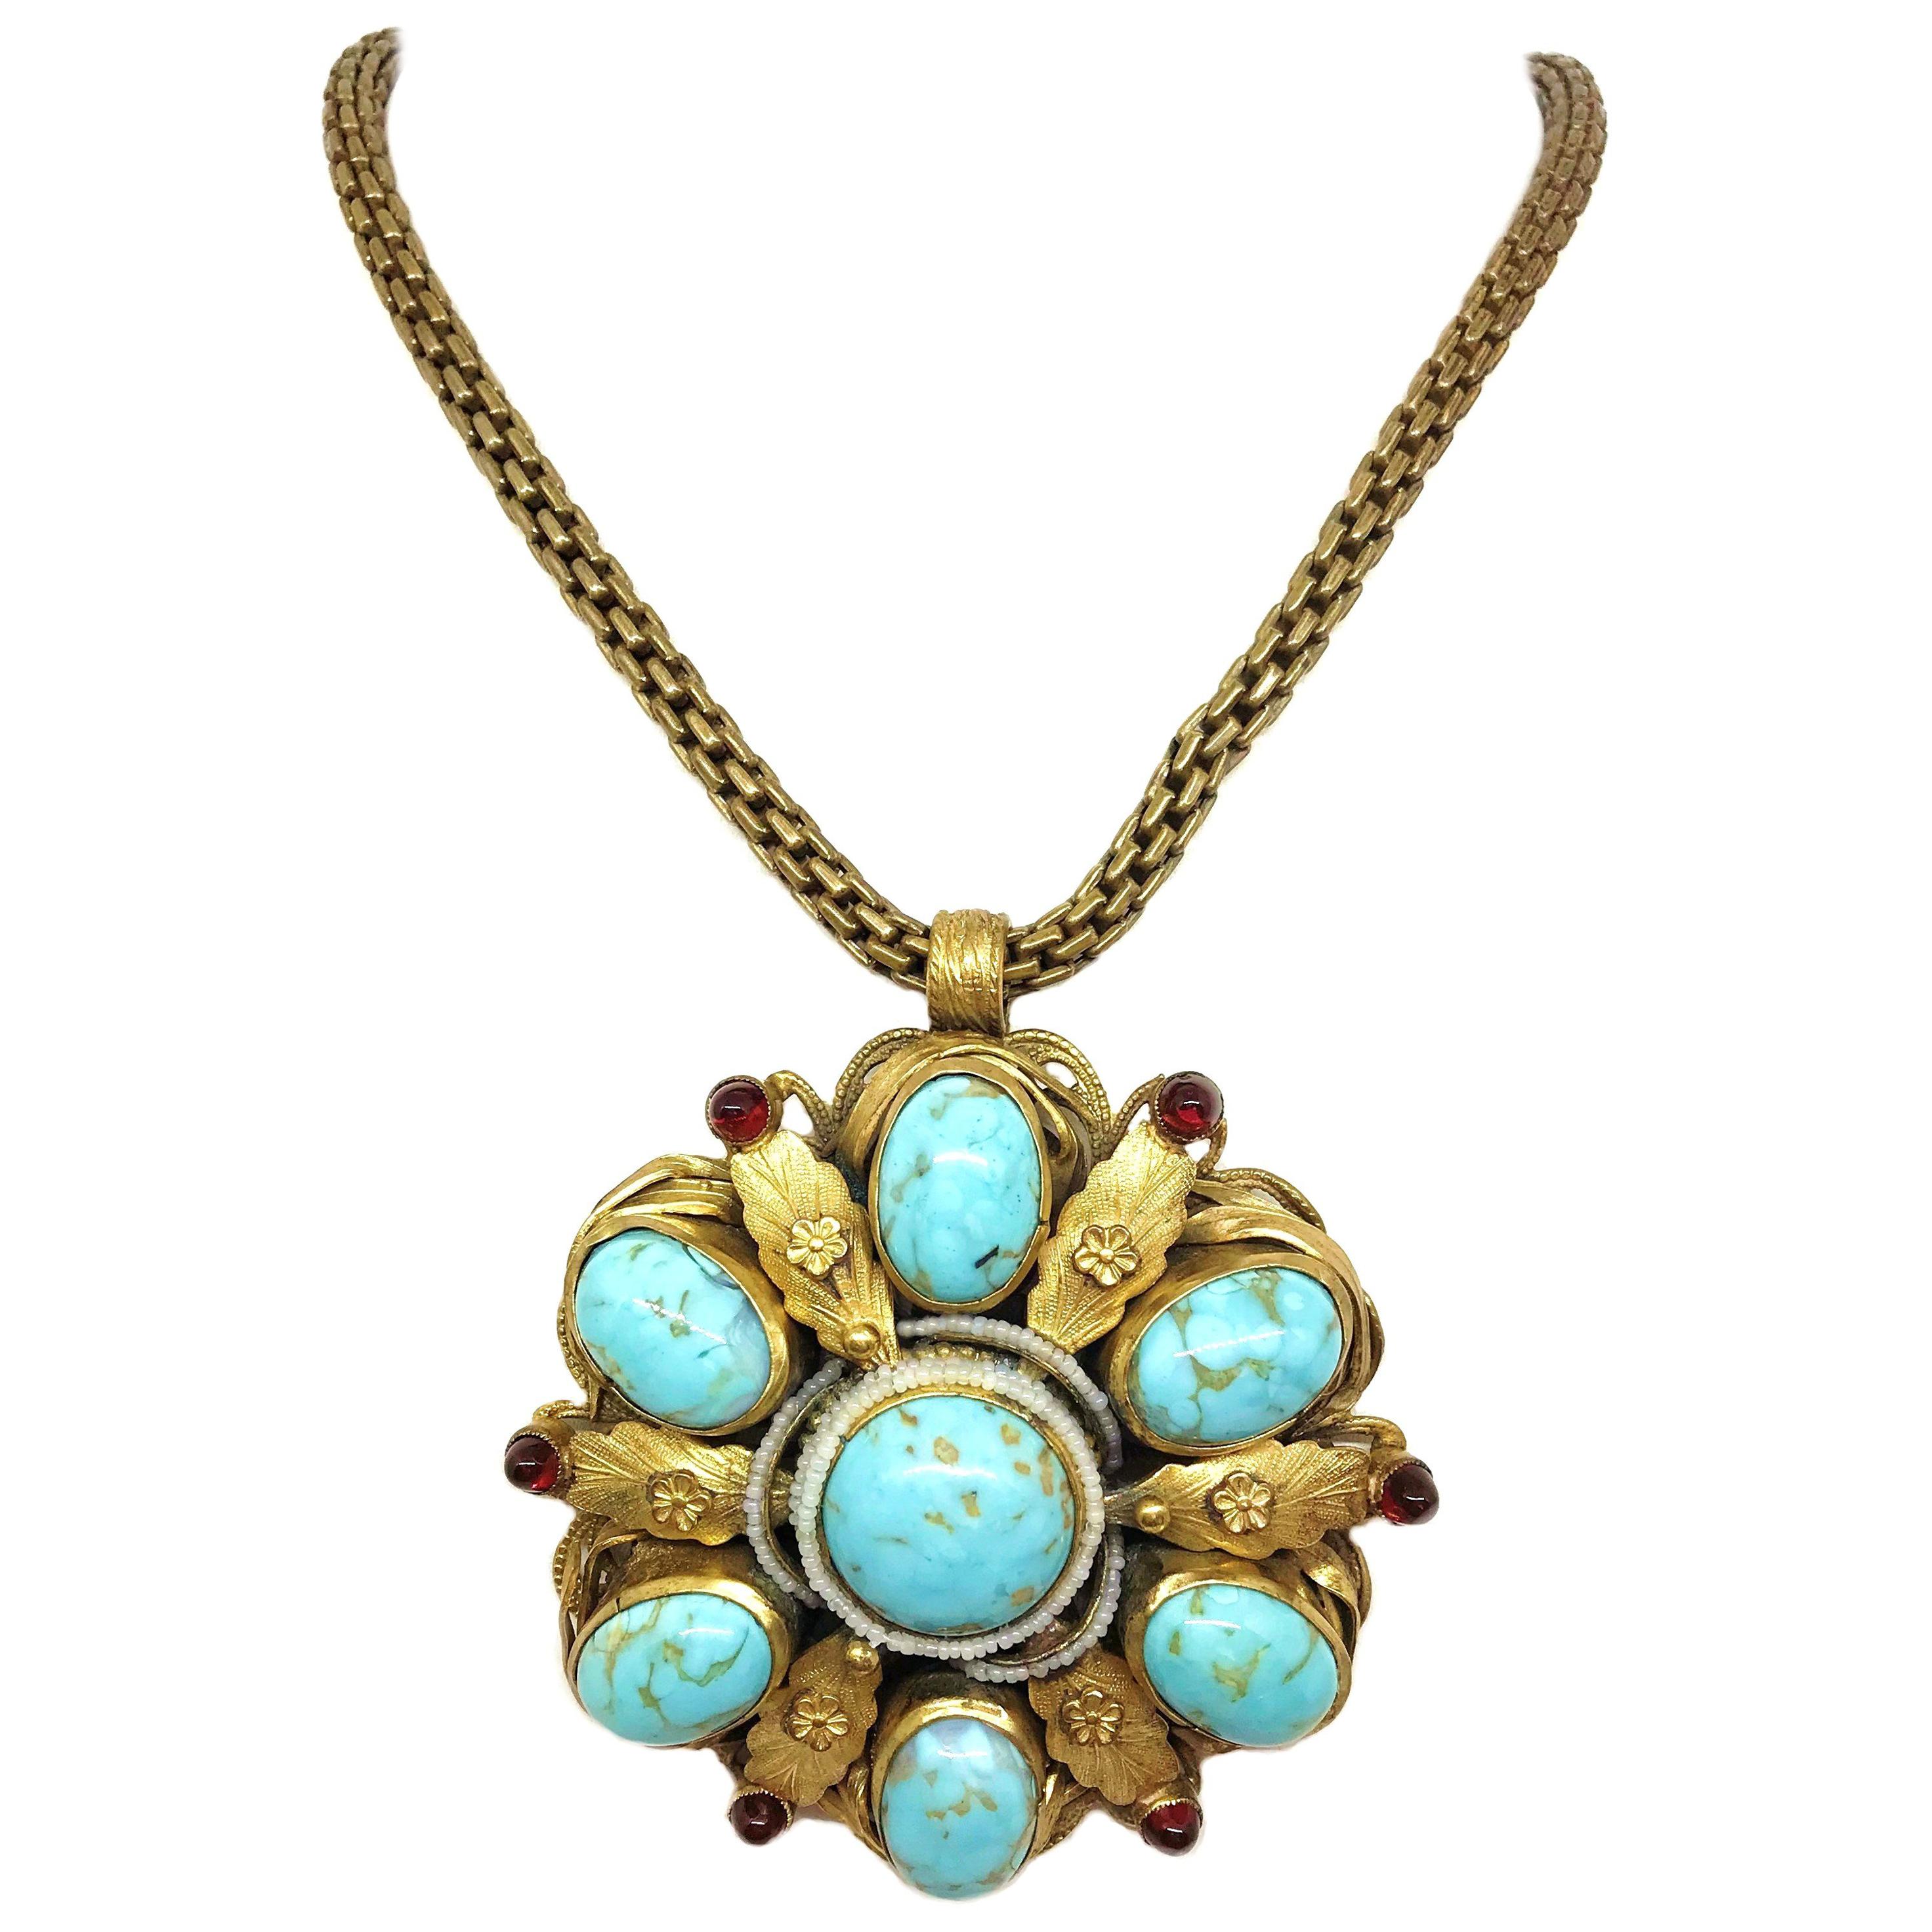 Circa 1940s Ernest Steiner Blue and Gold Jeweled Pendant Necklace  For Sale